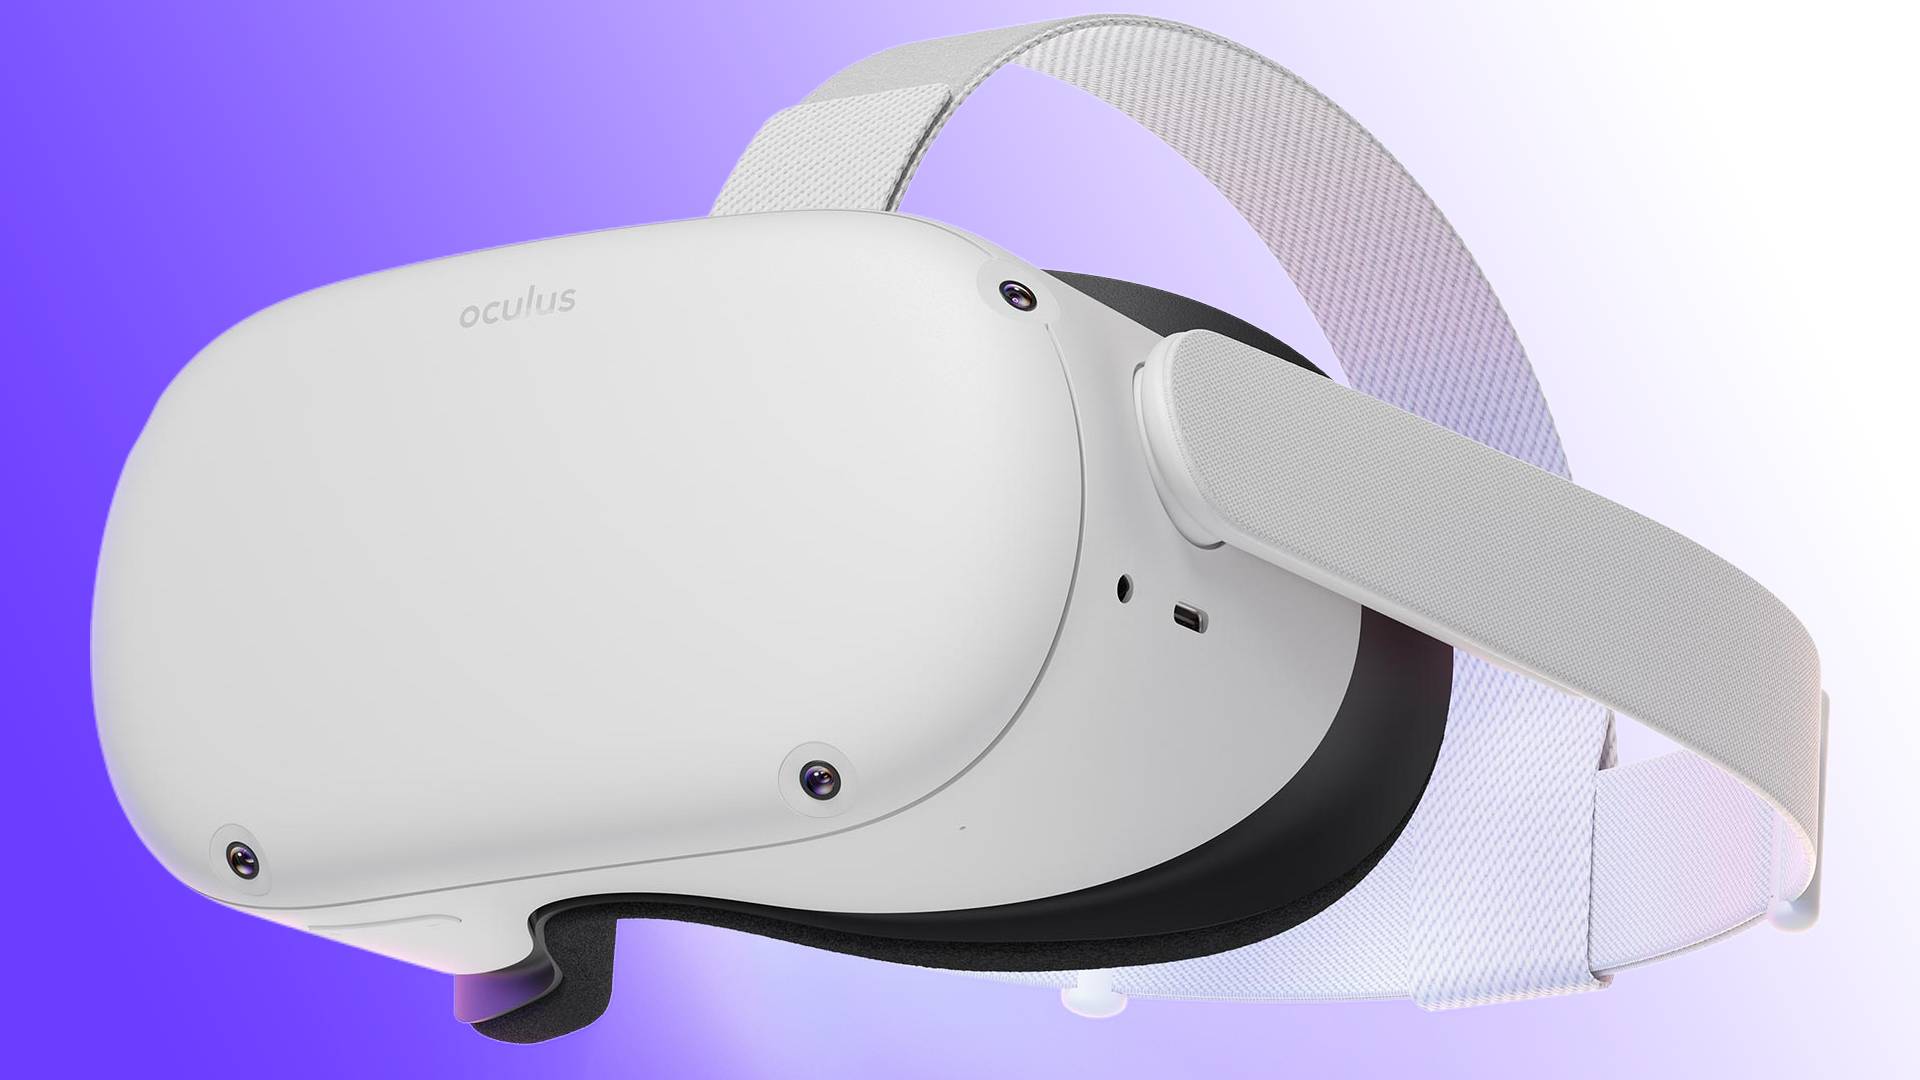 The Oculus Quest 2 VR headset looks to the left against a blue and white background